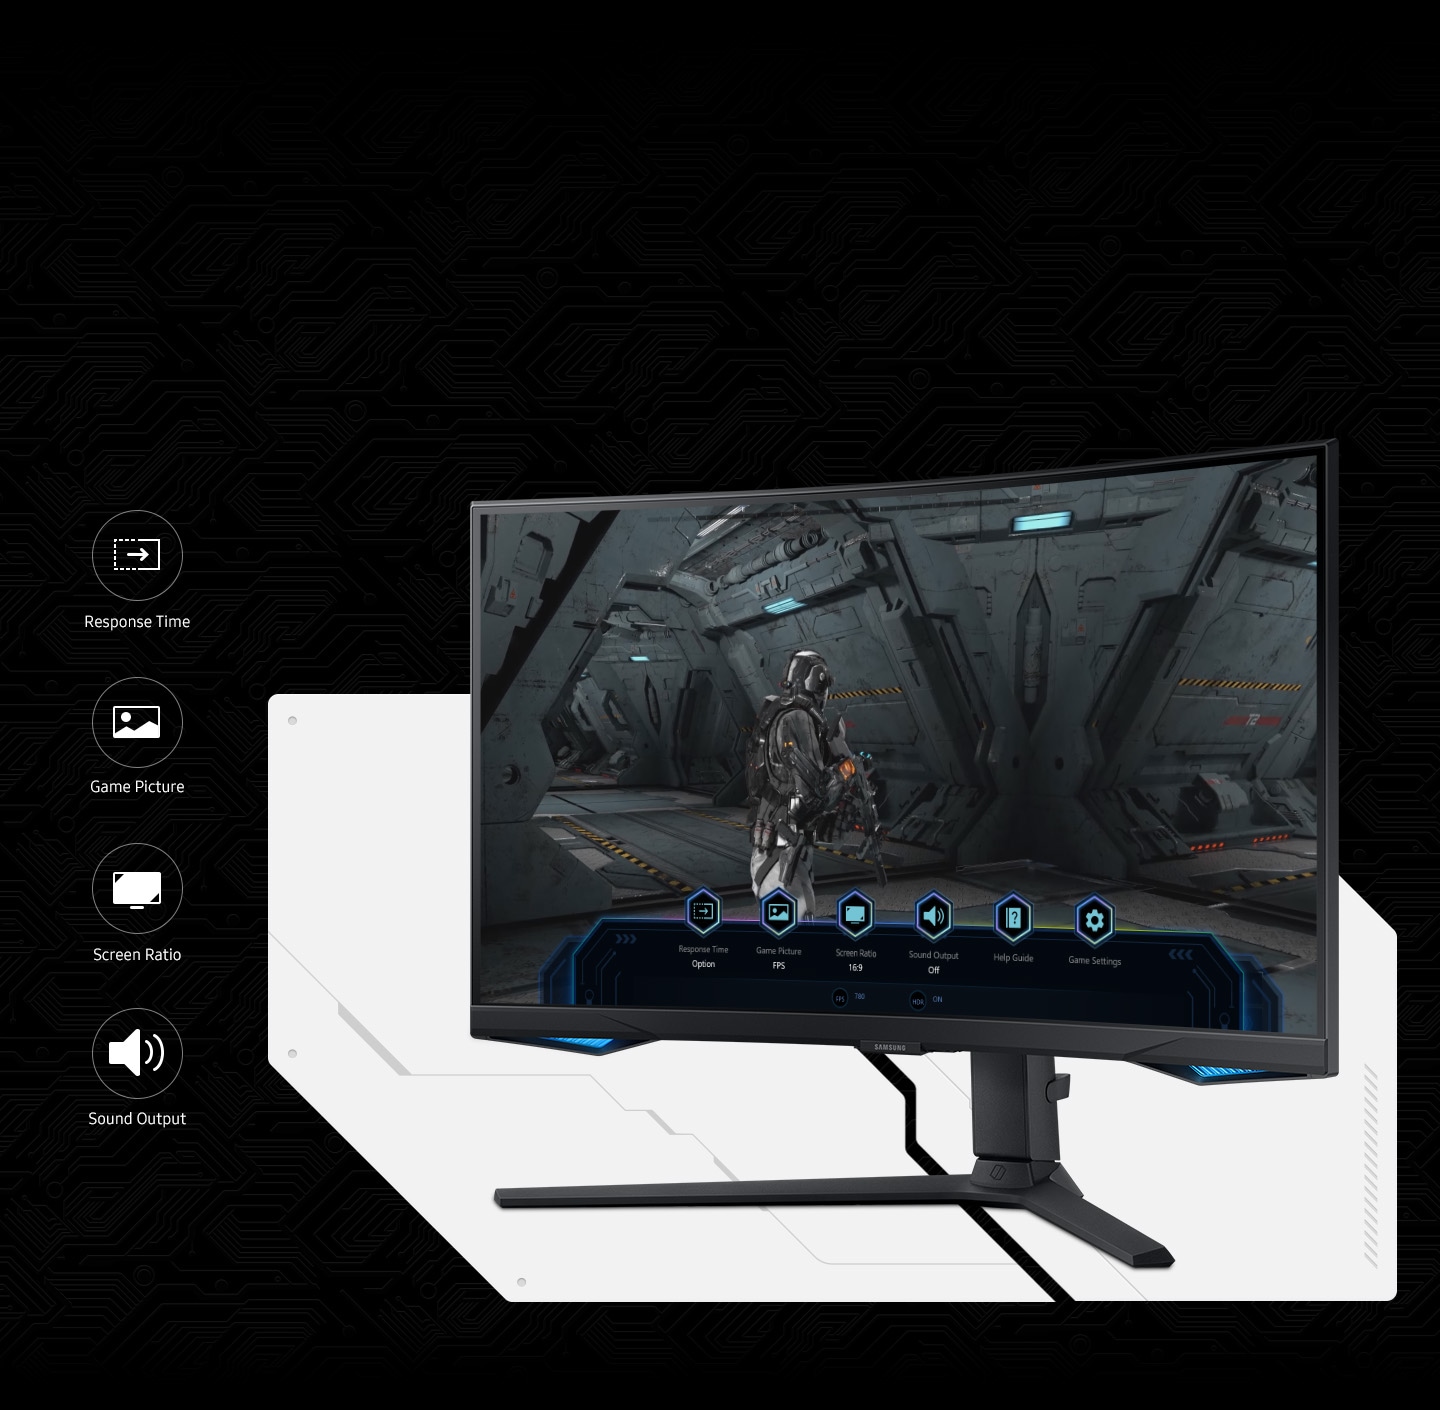 There's a gaming scene on the monitor. And at the bottom of the screen, there is a toolbar showing six icons, demonstrating the Game Bar feature. There're 4 game bar icons - response time, game picture, screen ratio and sound output.